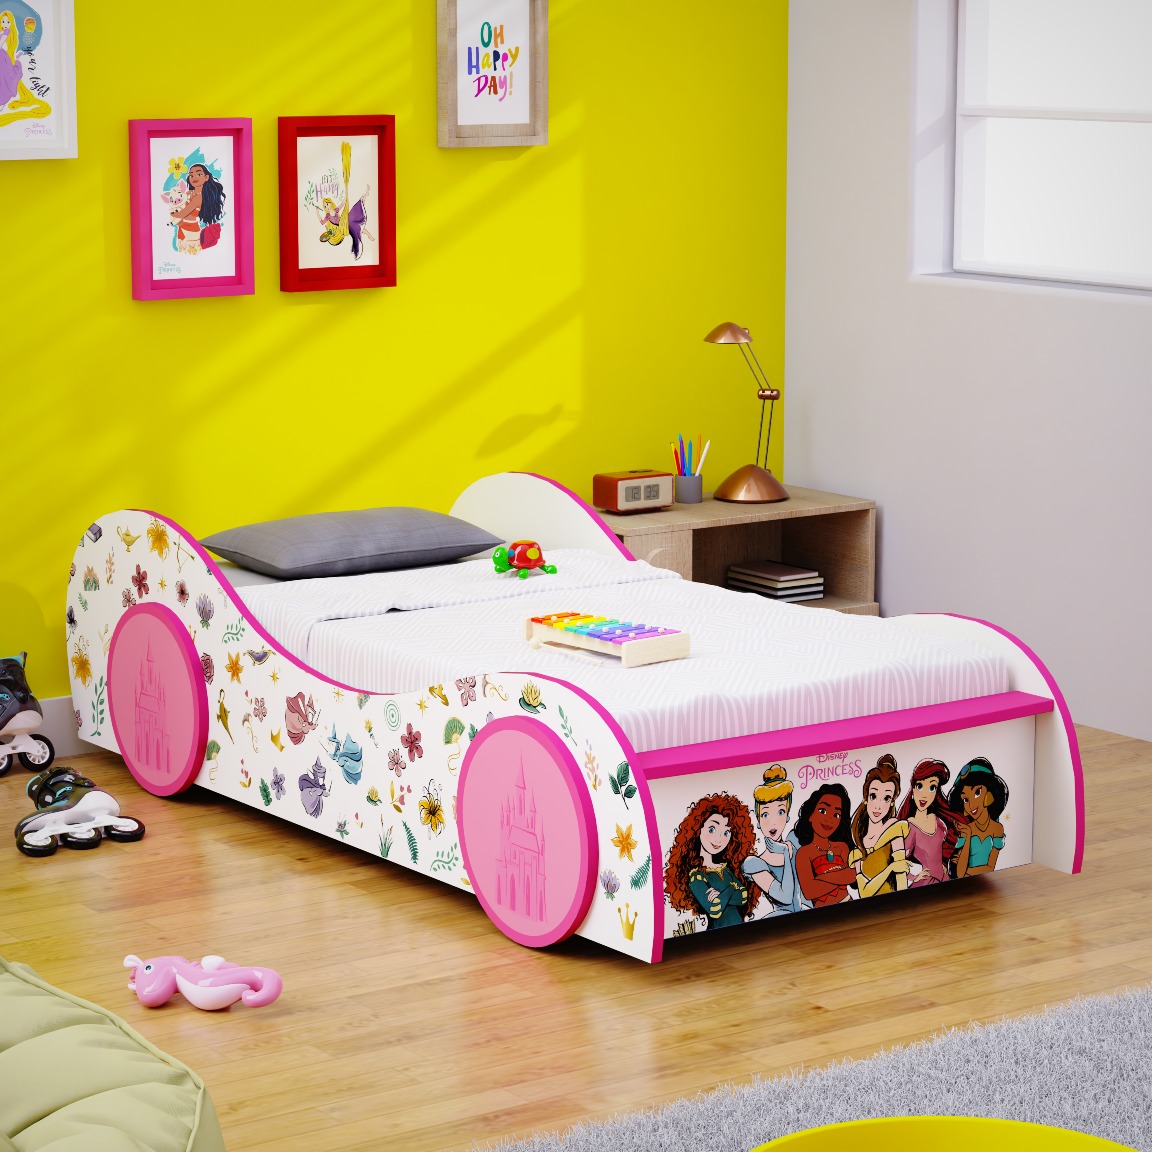 Boingg Snowflake Princess Engineered Wood Car Single Bed for Kids in Pink Colour